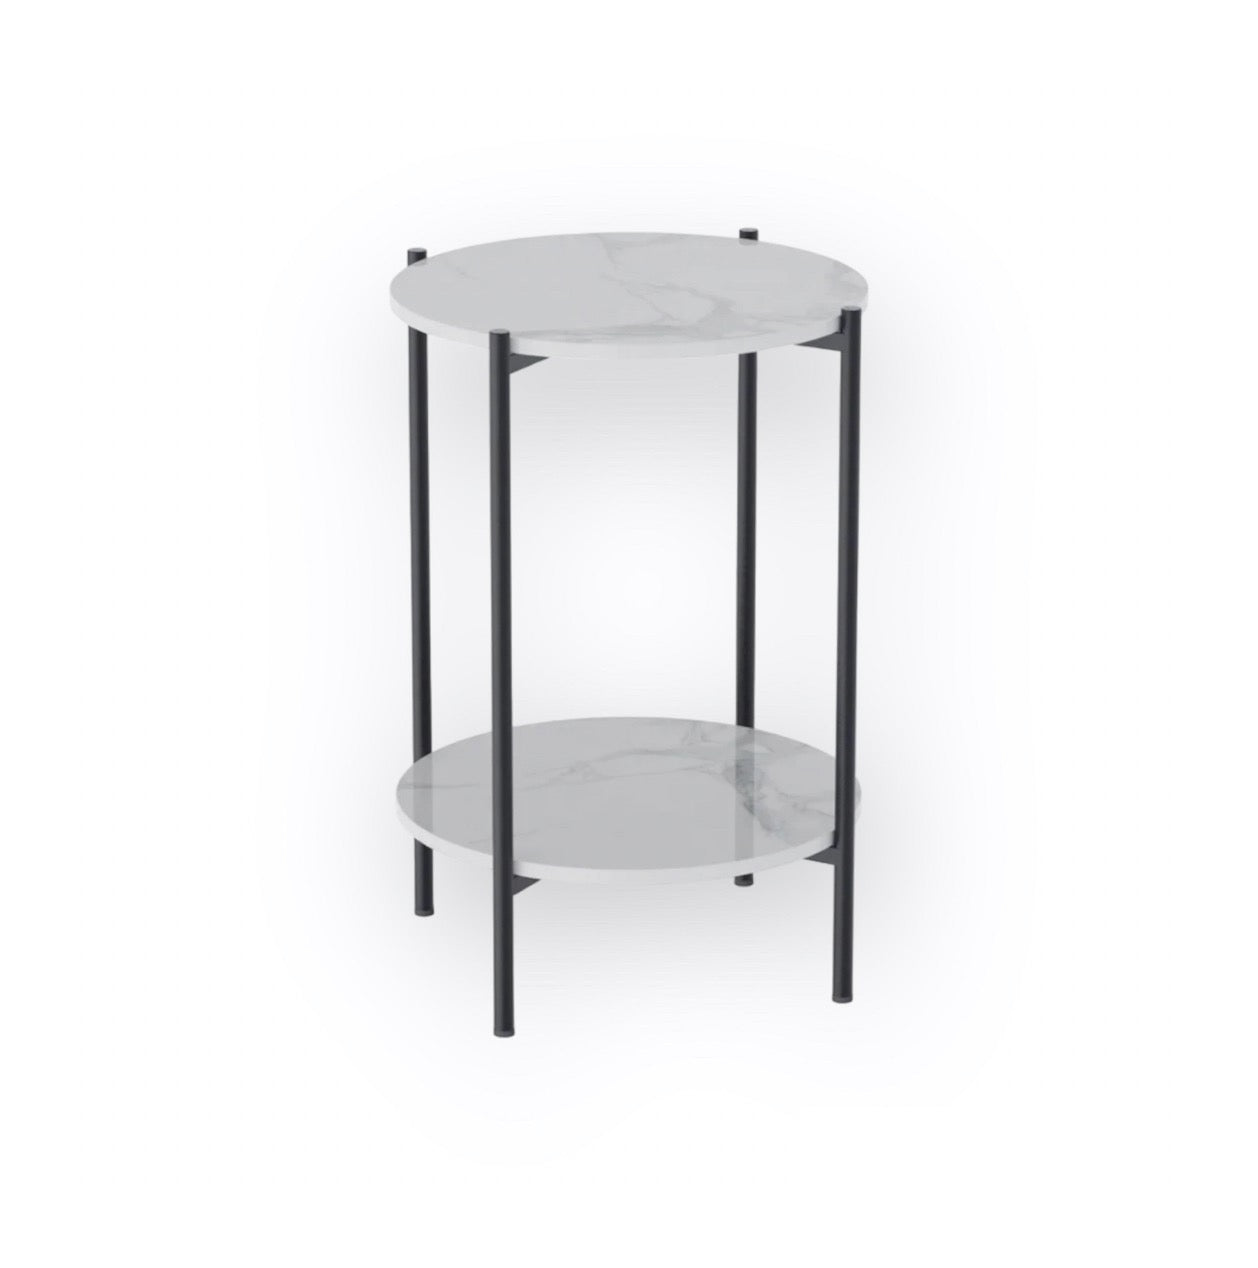 Coulsdon Interior Ave – Alba Side Table